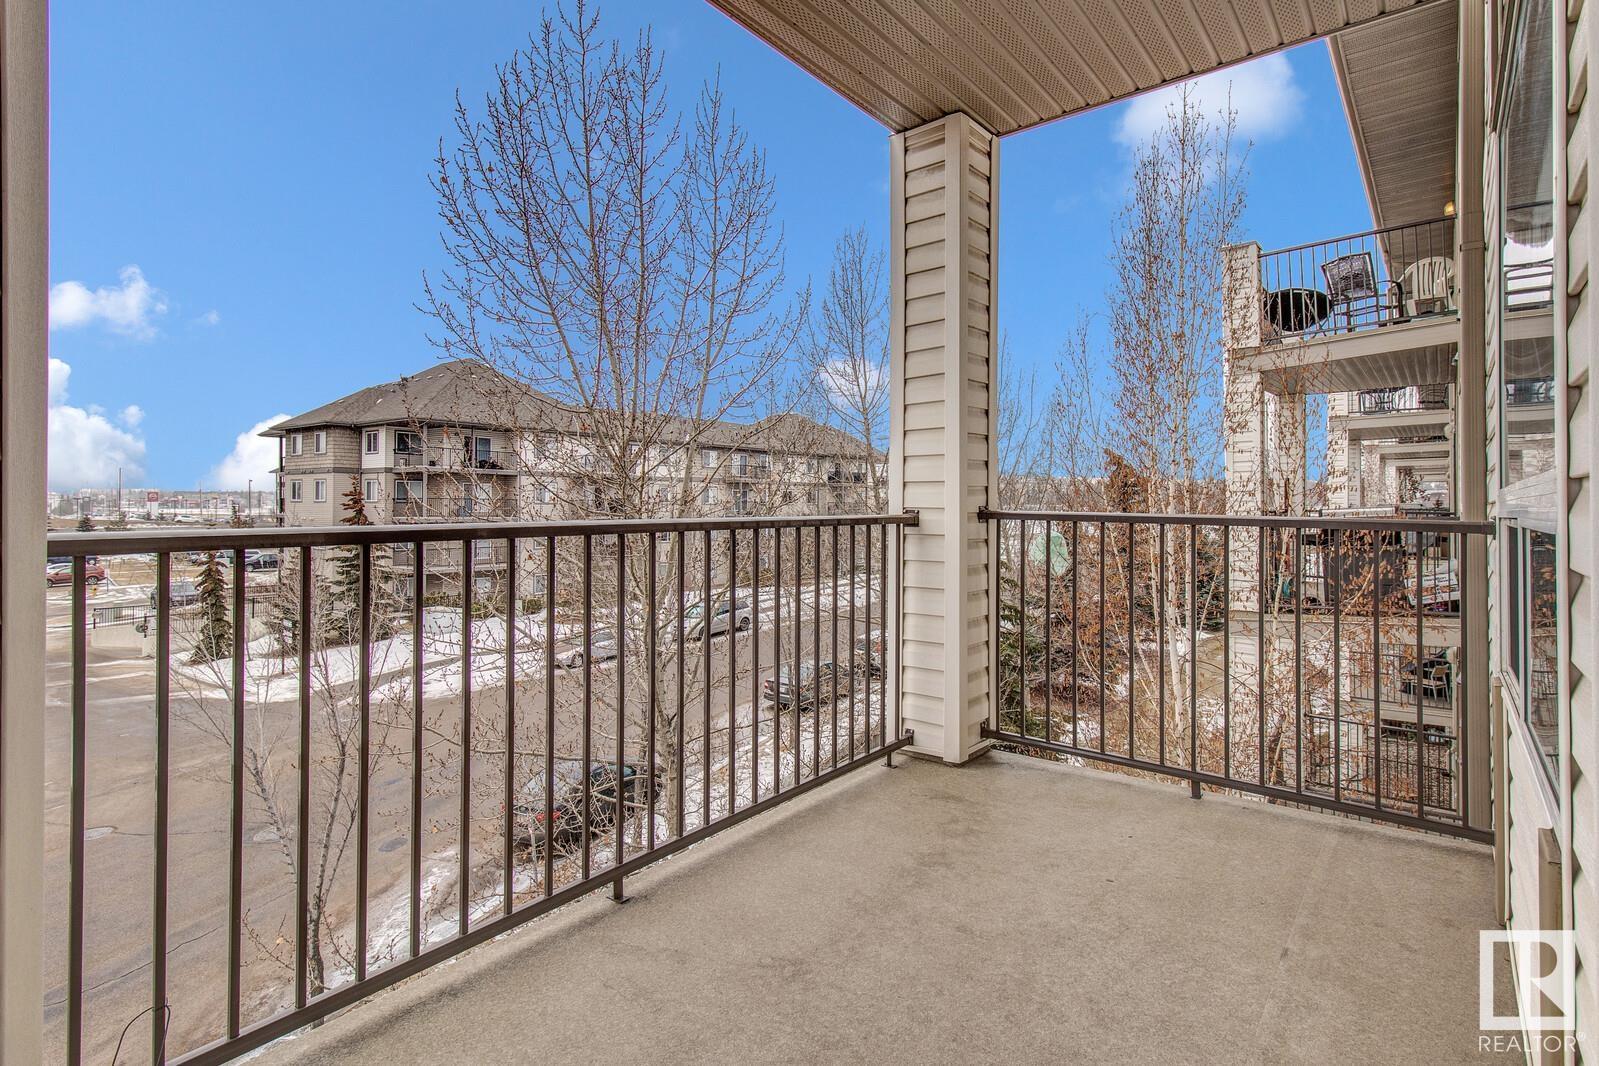      #2312 320 CLAREVIEW STATION DR NW , Edmonton,  ,T5Y 0E5 ;  Listing Number: MLS E4328705